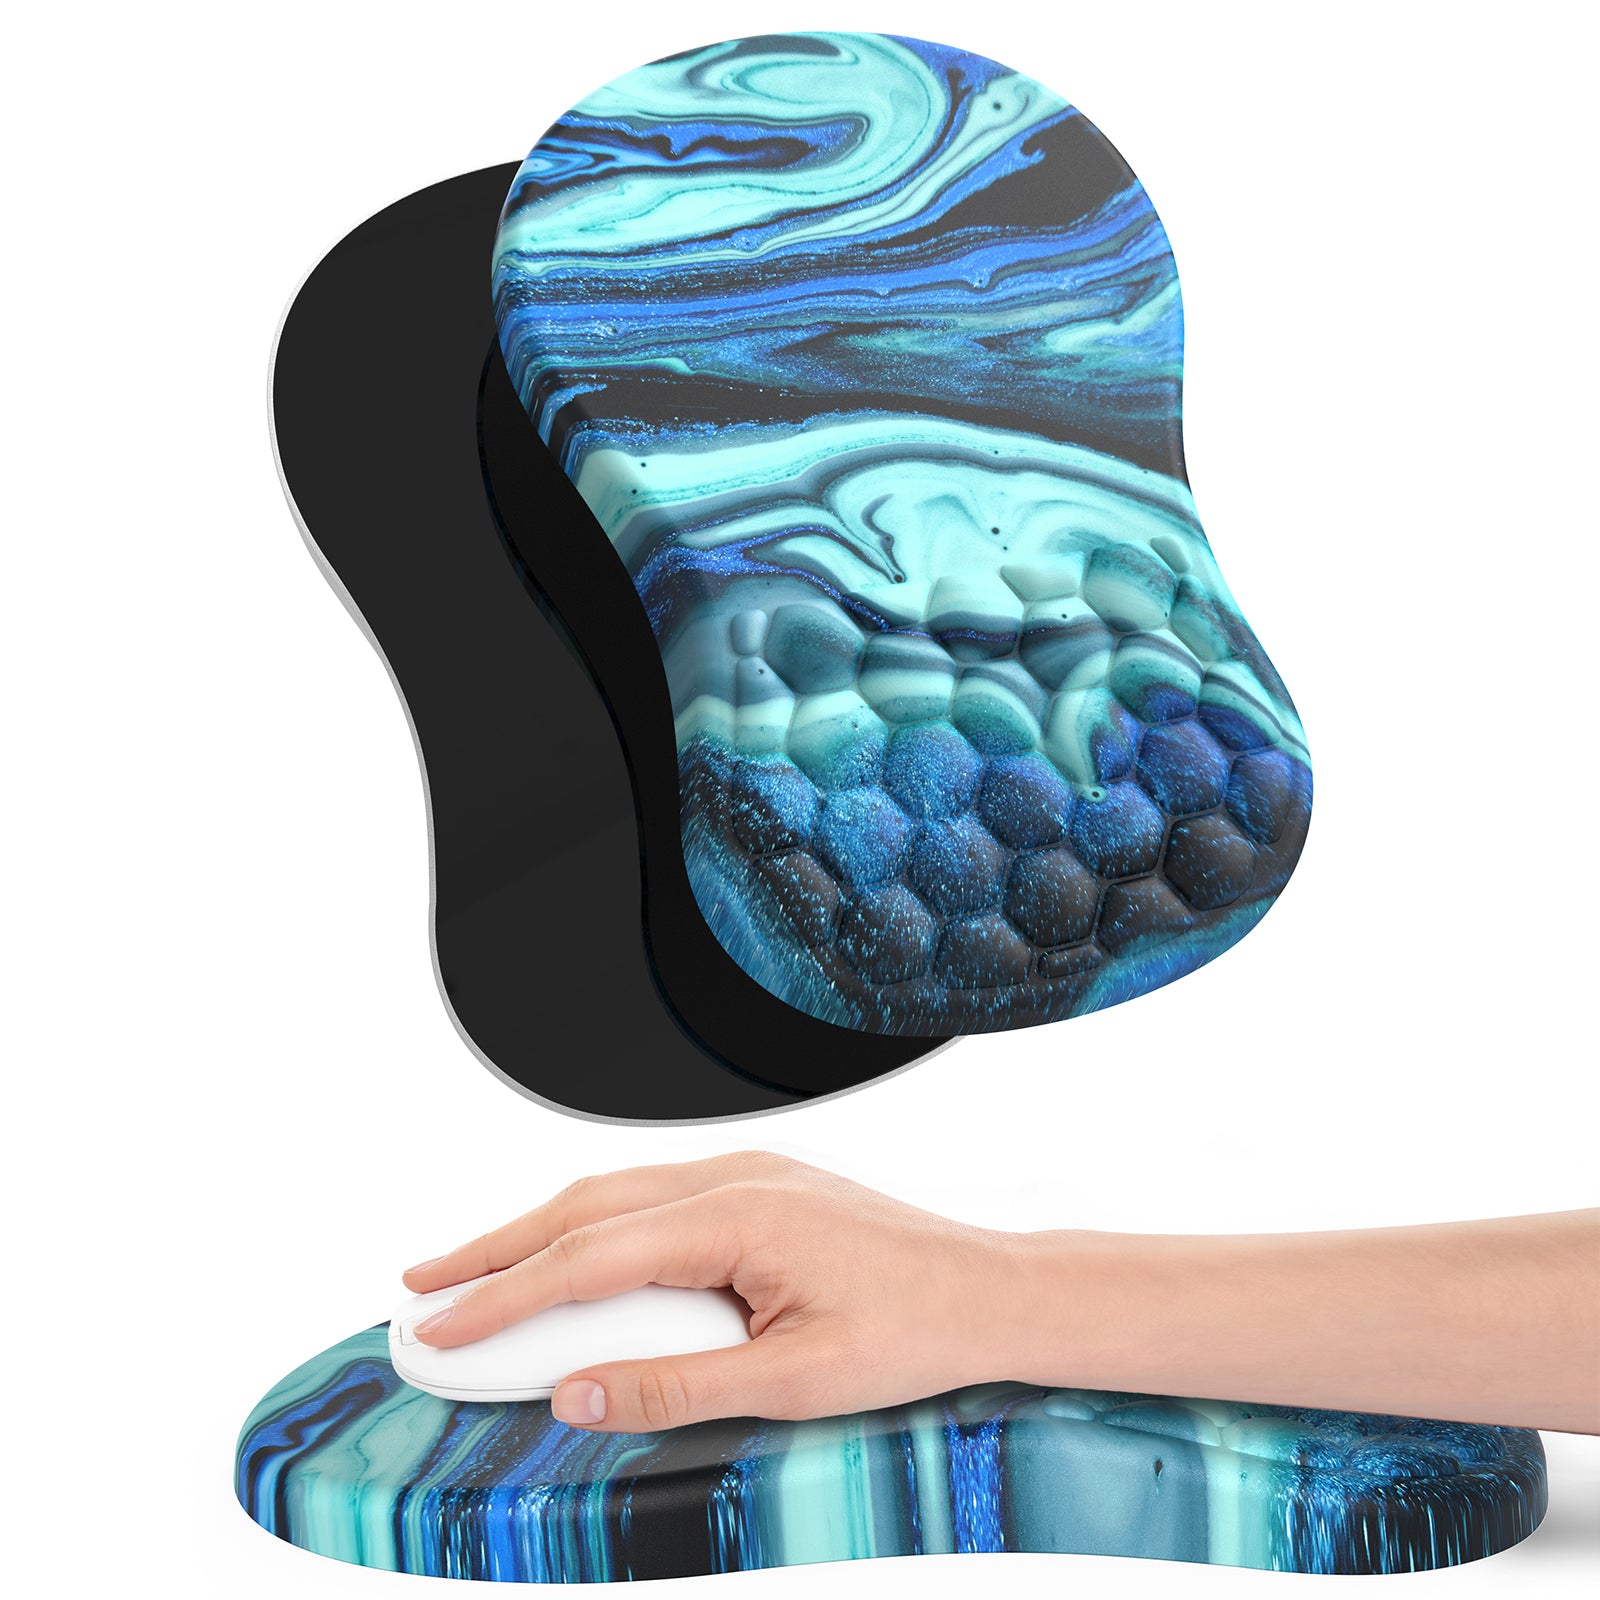 Giecy Ergonomic Mouse Pad Wrist Support, Wrist Rest Pain Relief Mousepad Memory Foam with Massage Design, Non-Slip PU Base, Mouse Pads for Home Office